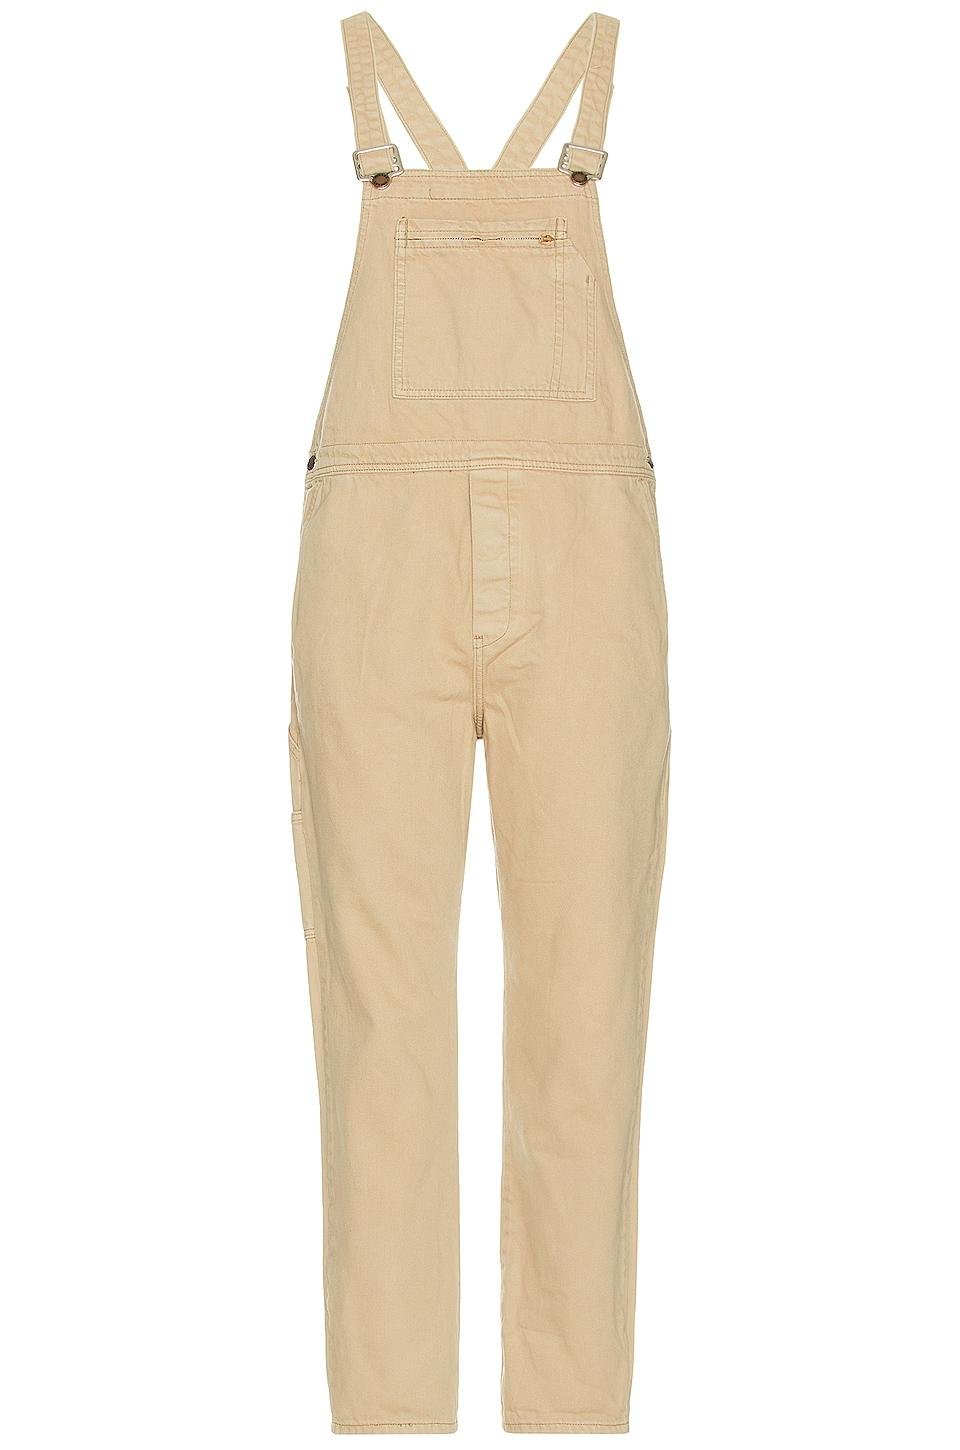 ROLLA'S Trade Overalls in Tan by ROLLA'S